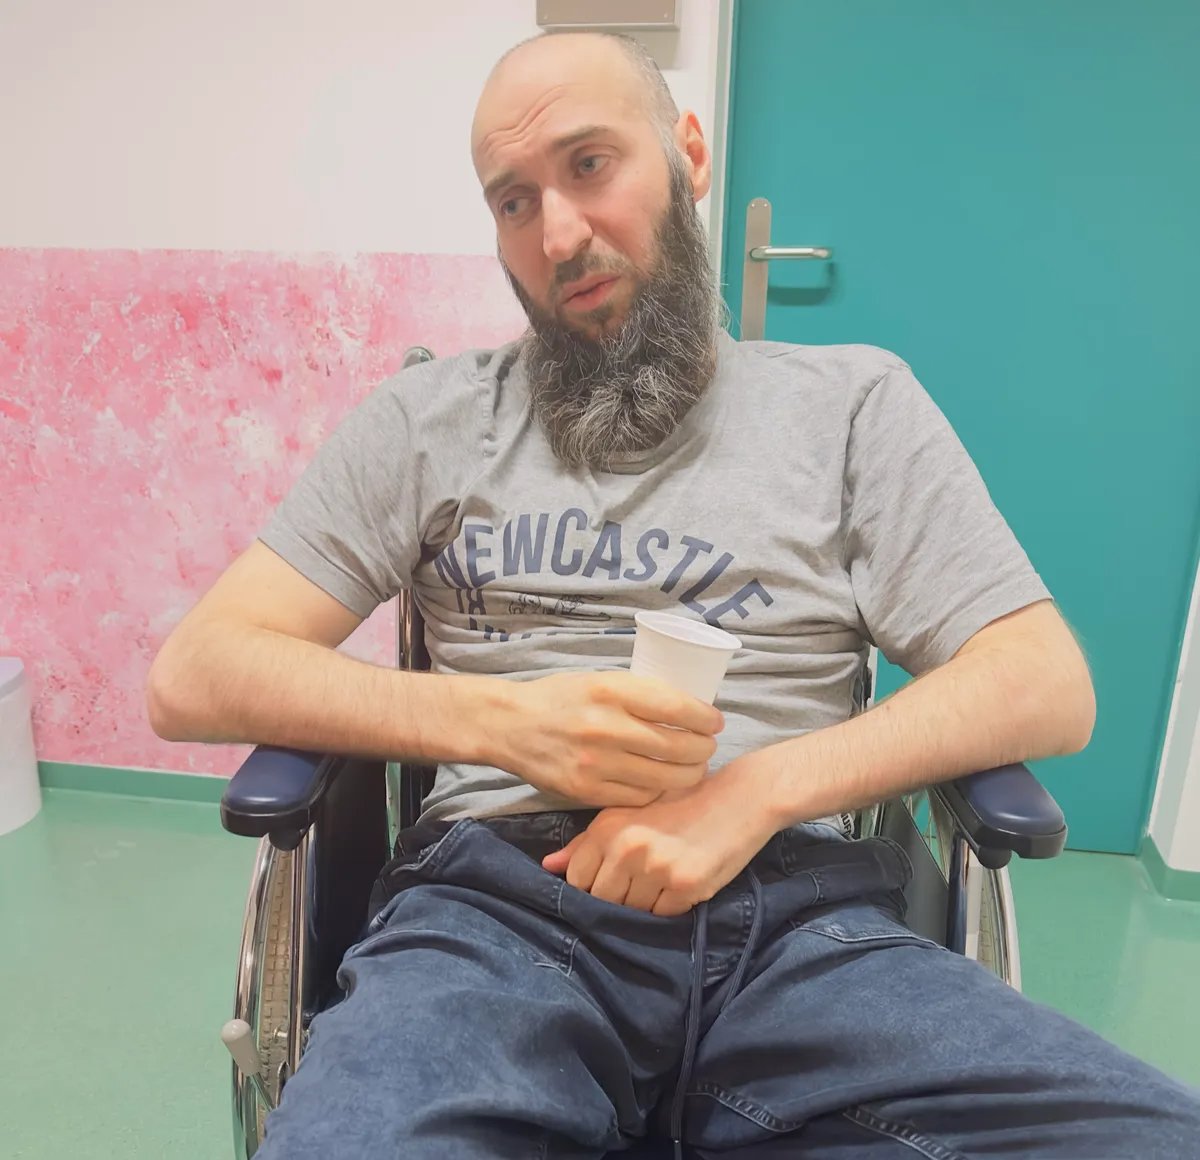 Ali Batayev in the hospital, where he was brought after 50 days of his hunger strike. Photo: Lachin Mamishov